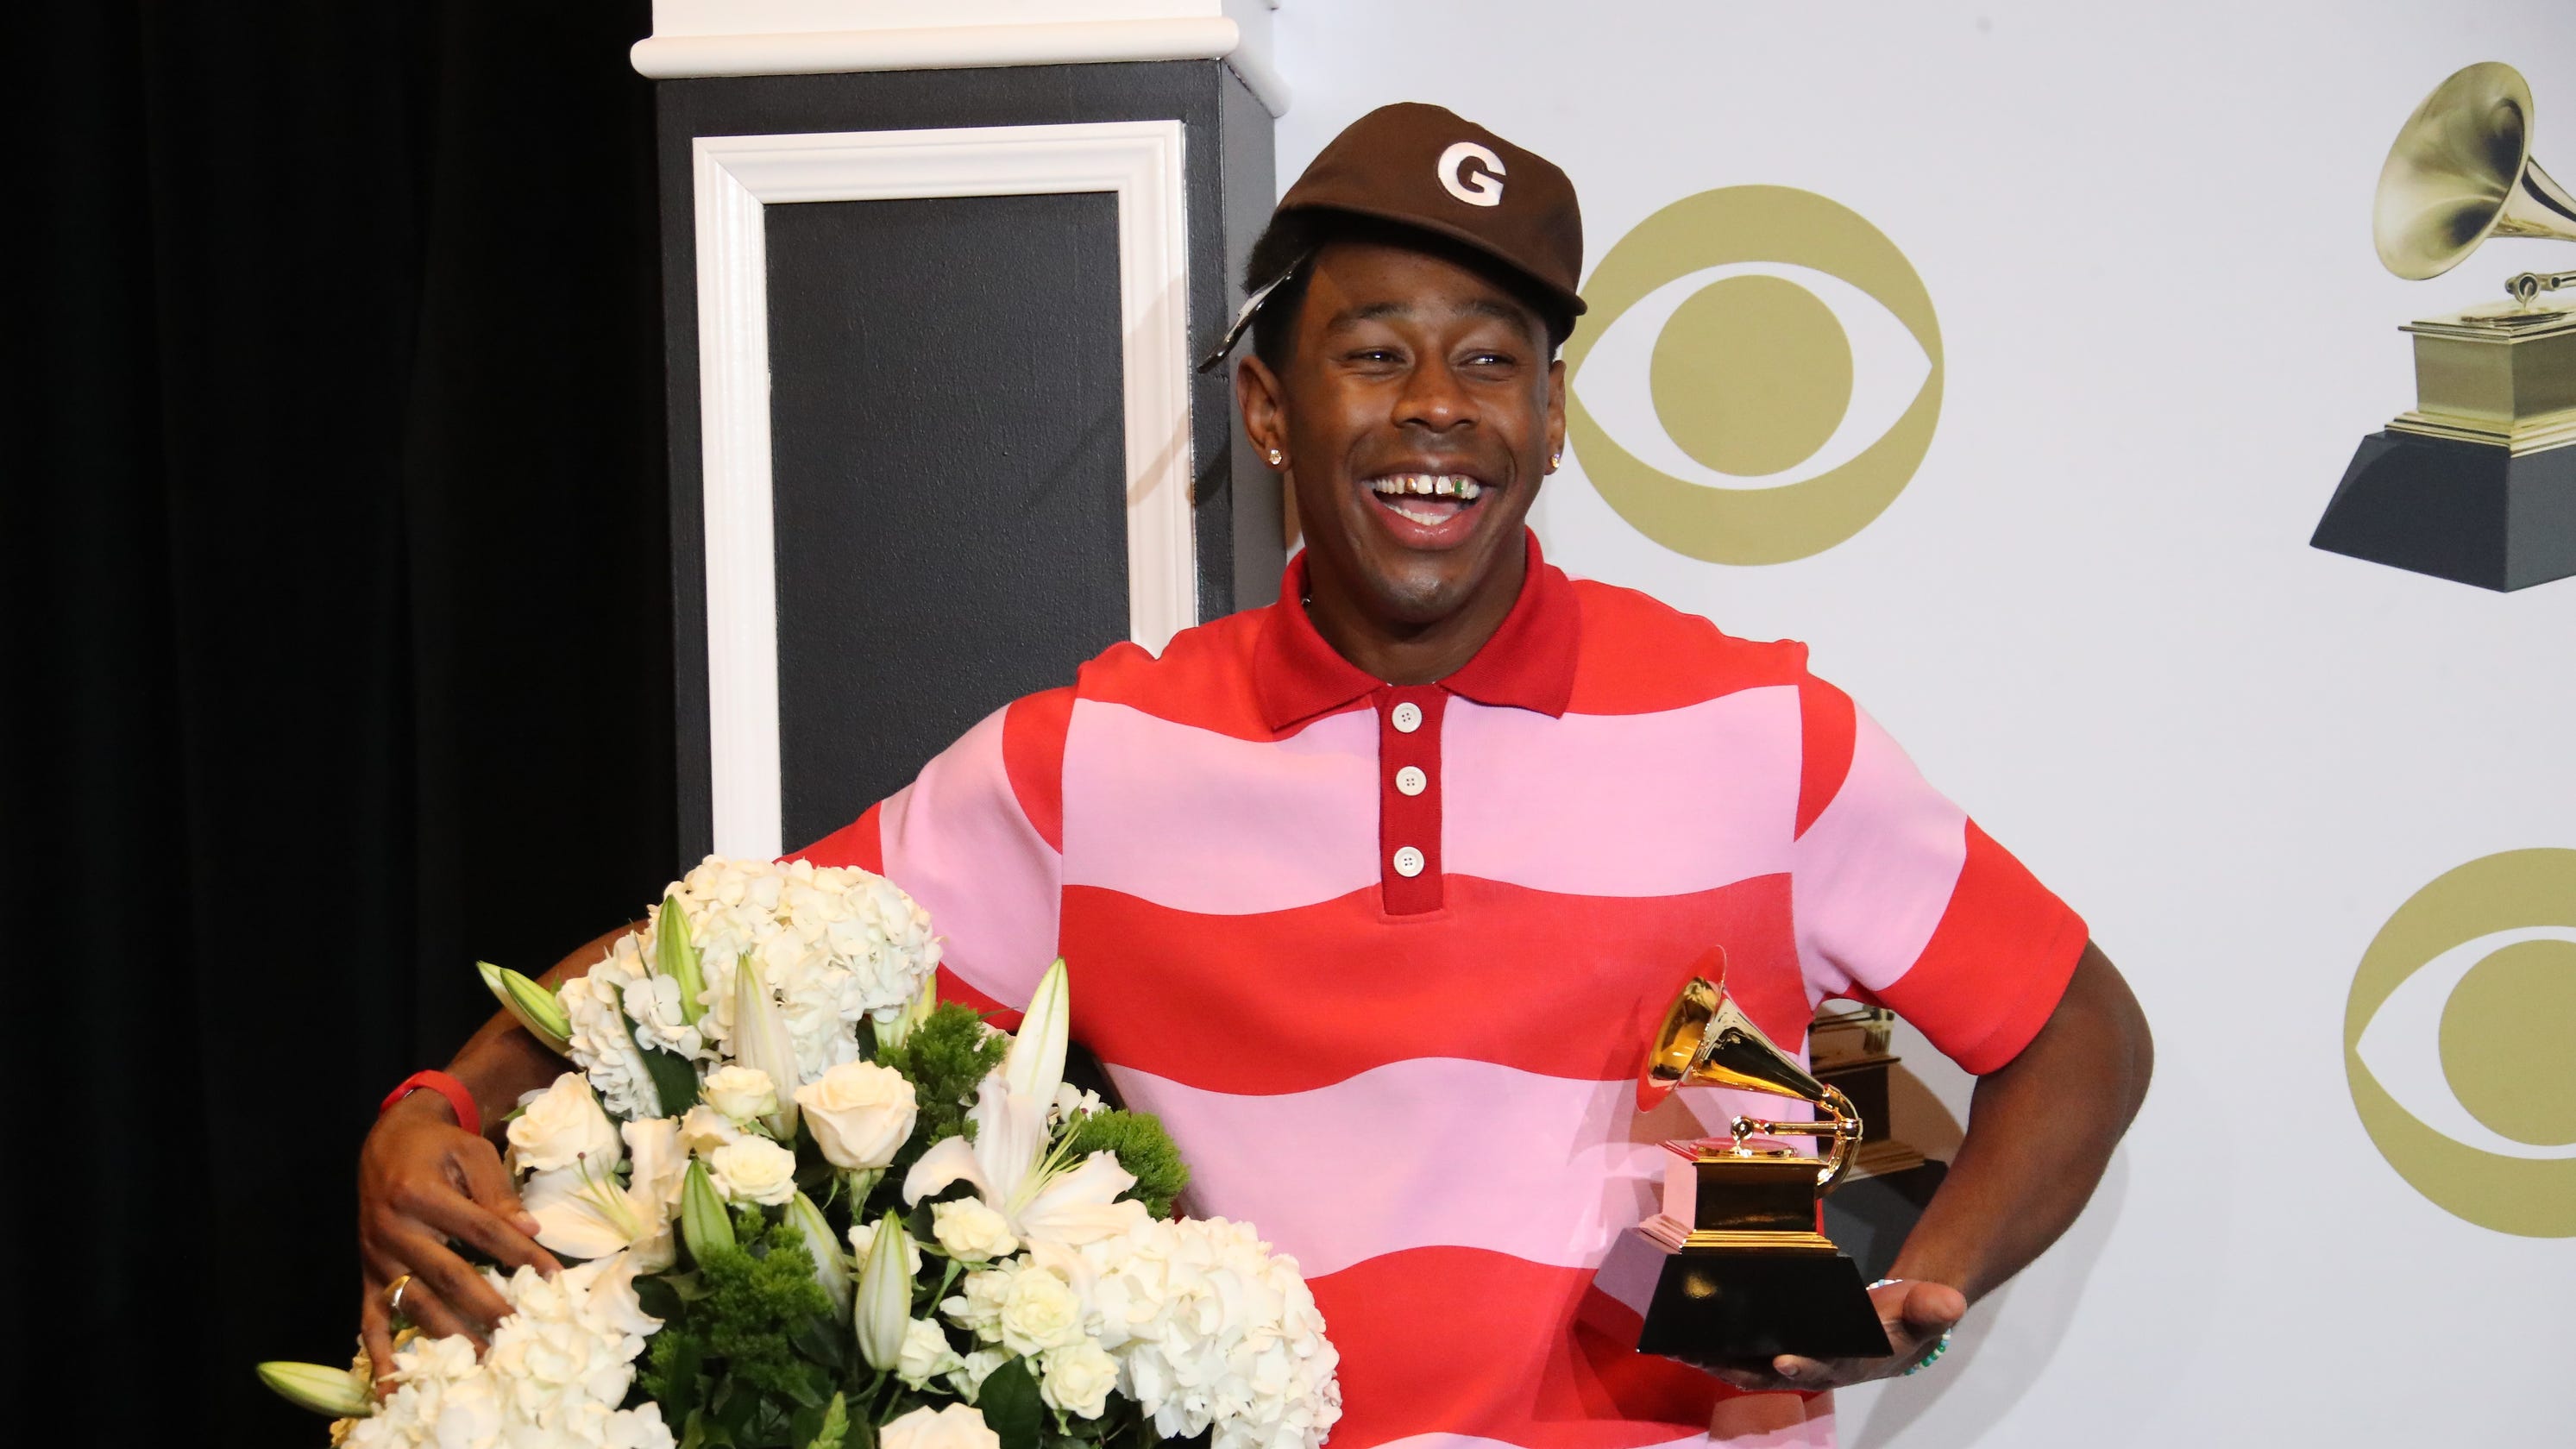 Grammys 2020: Winners, nominees speak out about voting controversy2986 x 1680